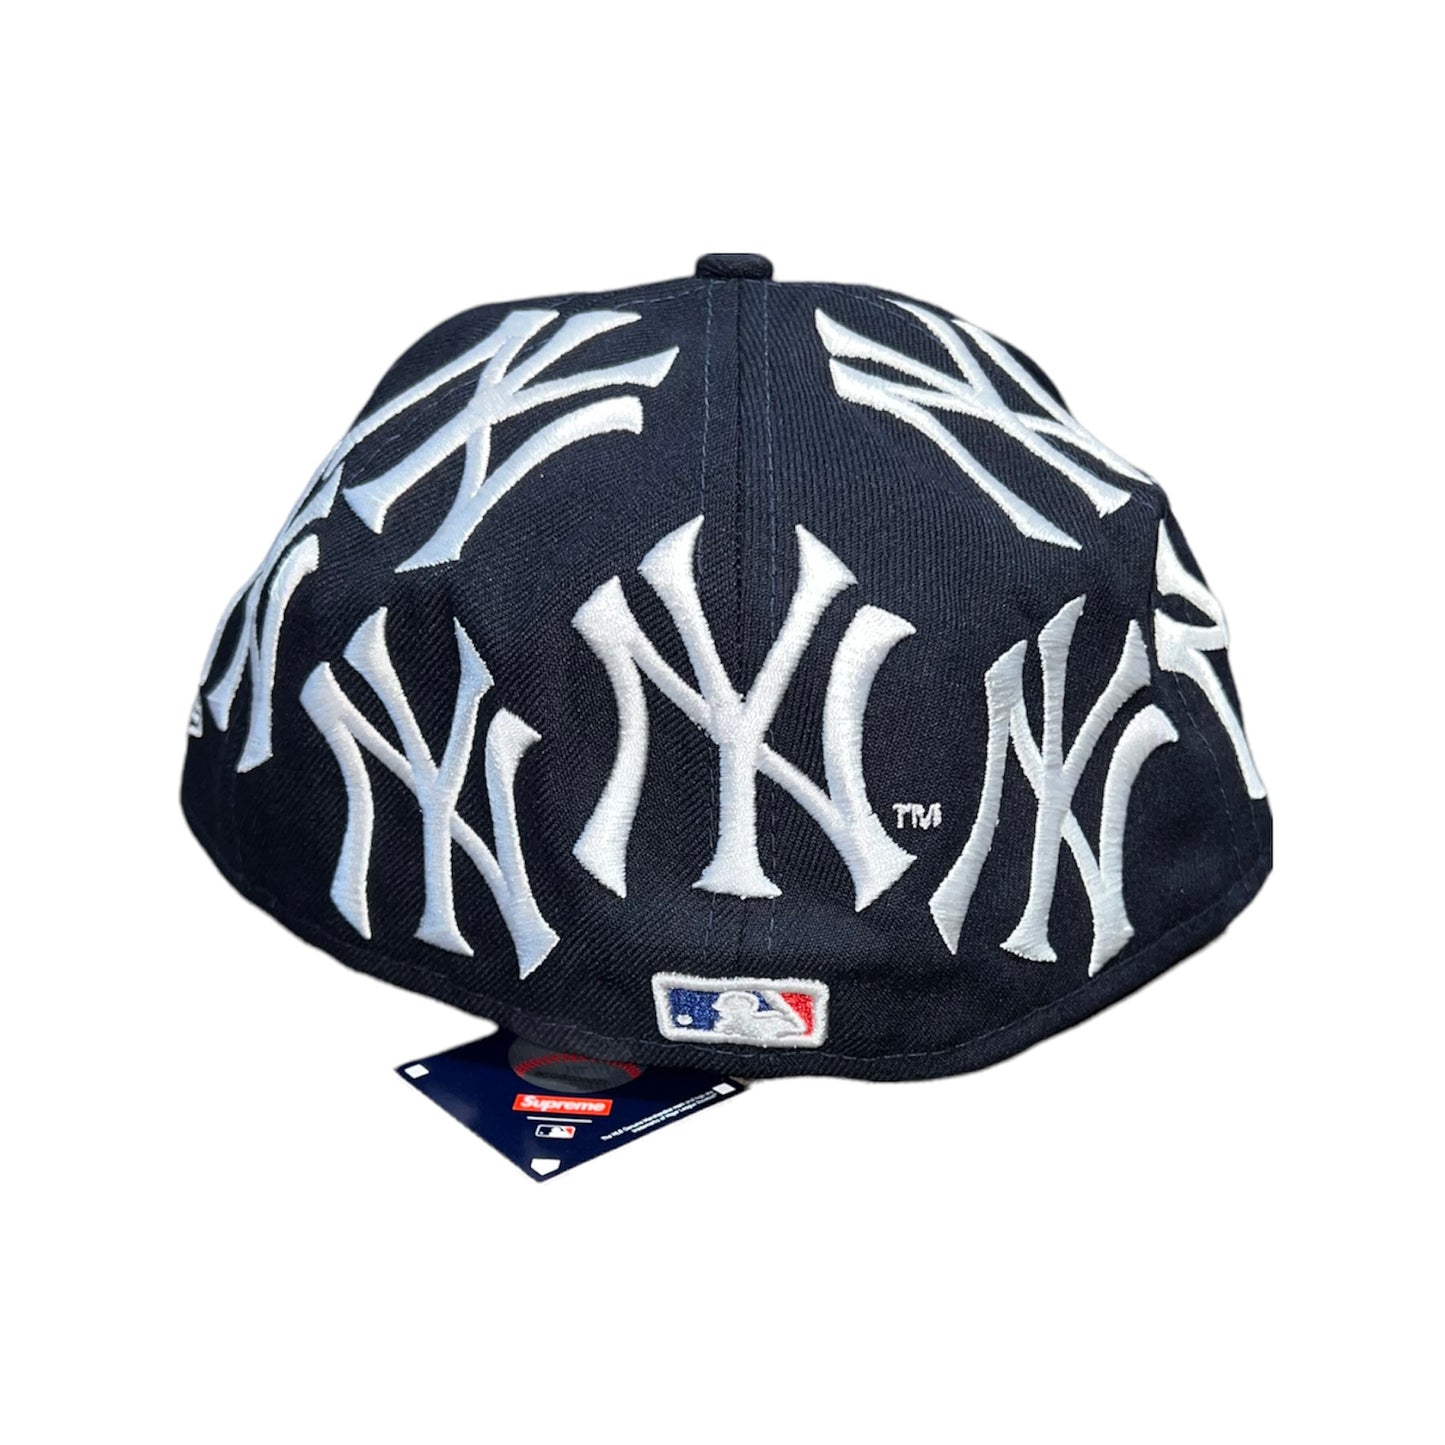 Supreme FW21 NY Yankees Fitted (Size 7 1/2)